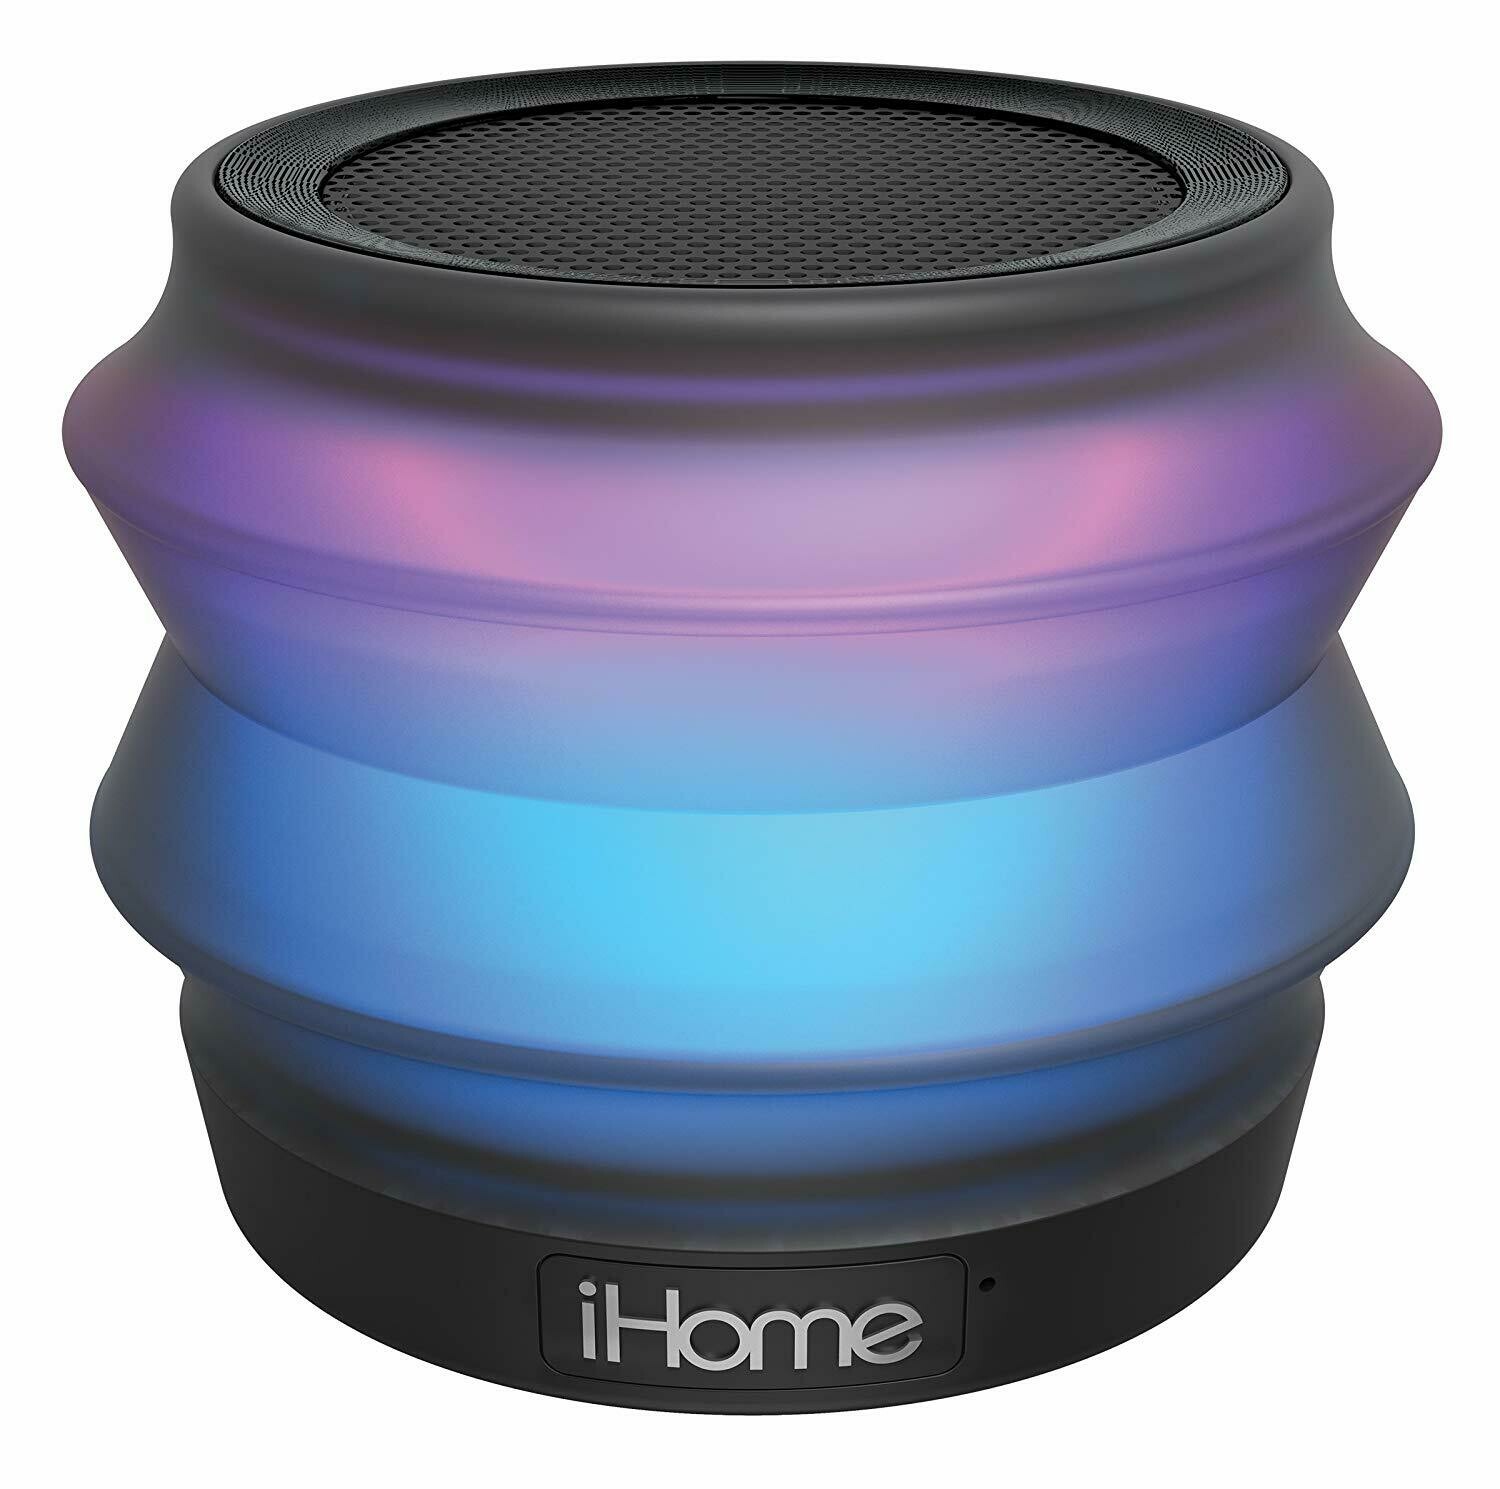 iHome iBT62B Portable Collapsible Bluetooth Color Changing Speaker with Speakerphone - Featuring Melody, Voice Powered Music Assistant